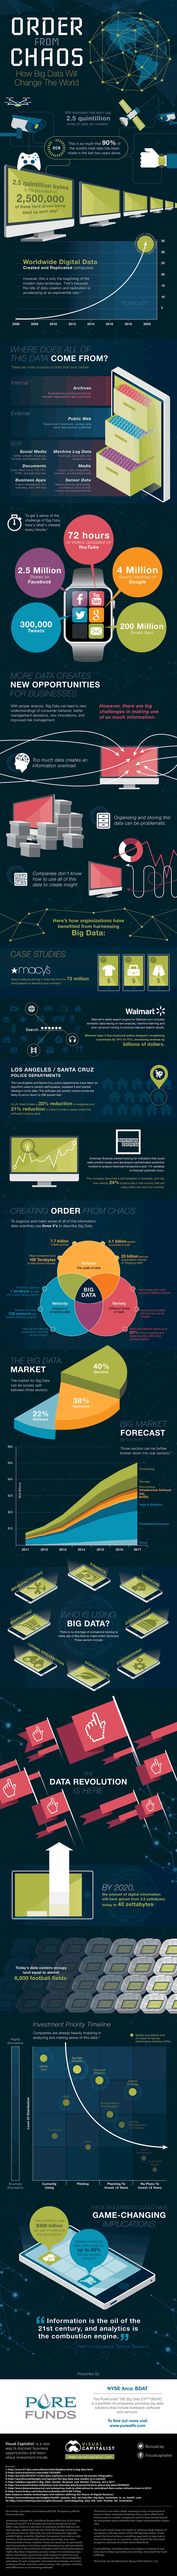 Big Data - creating order from chaos - source Visual Capitalist